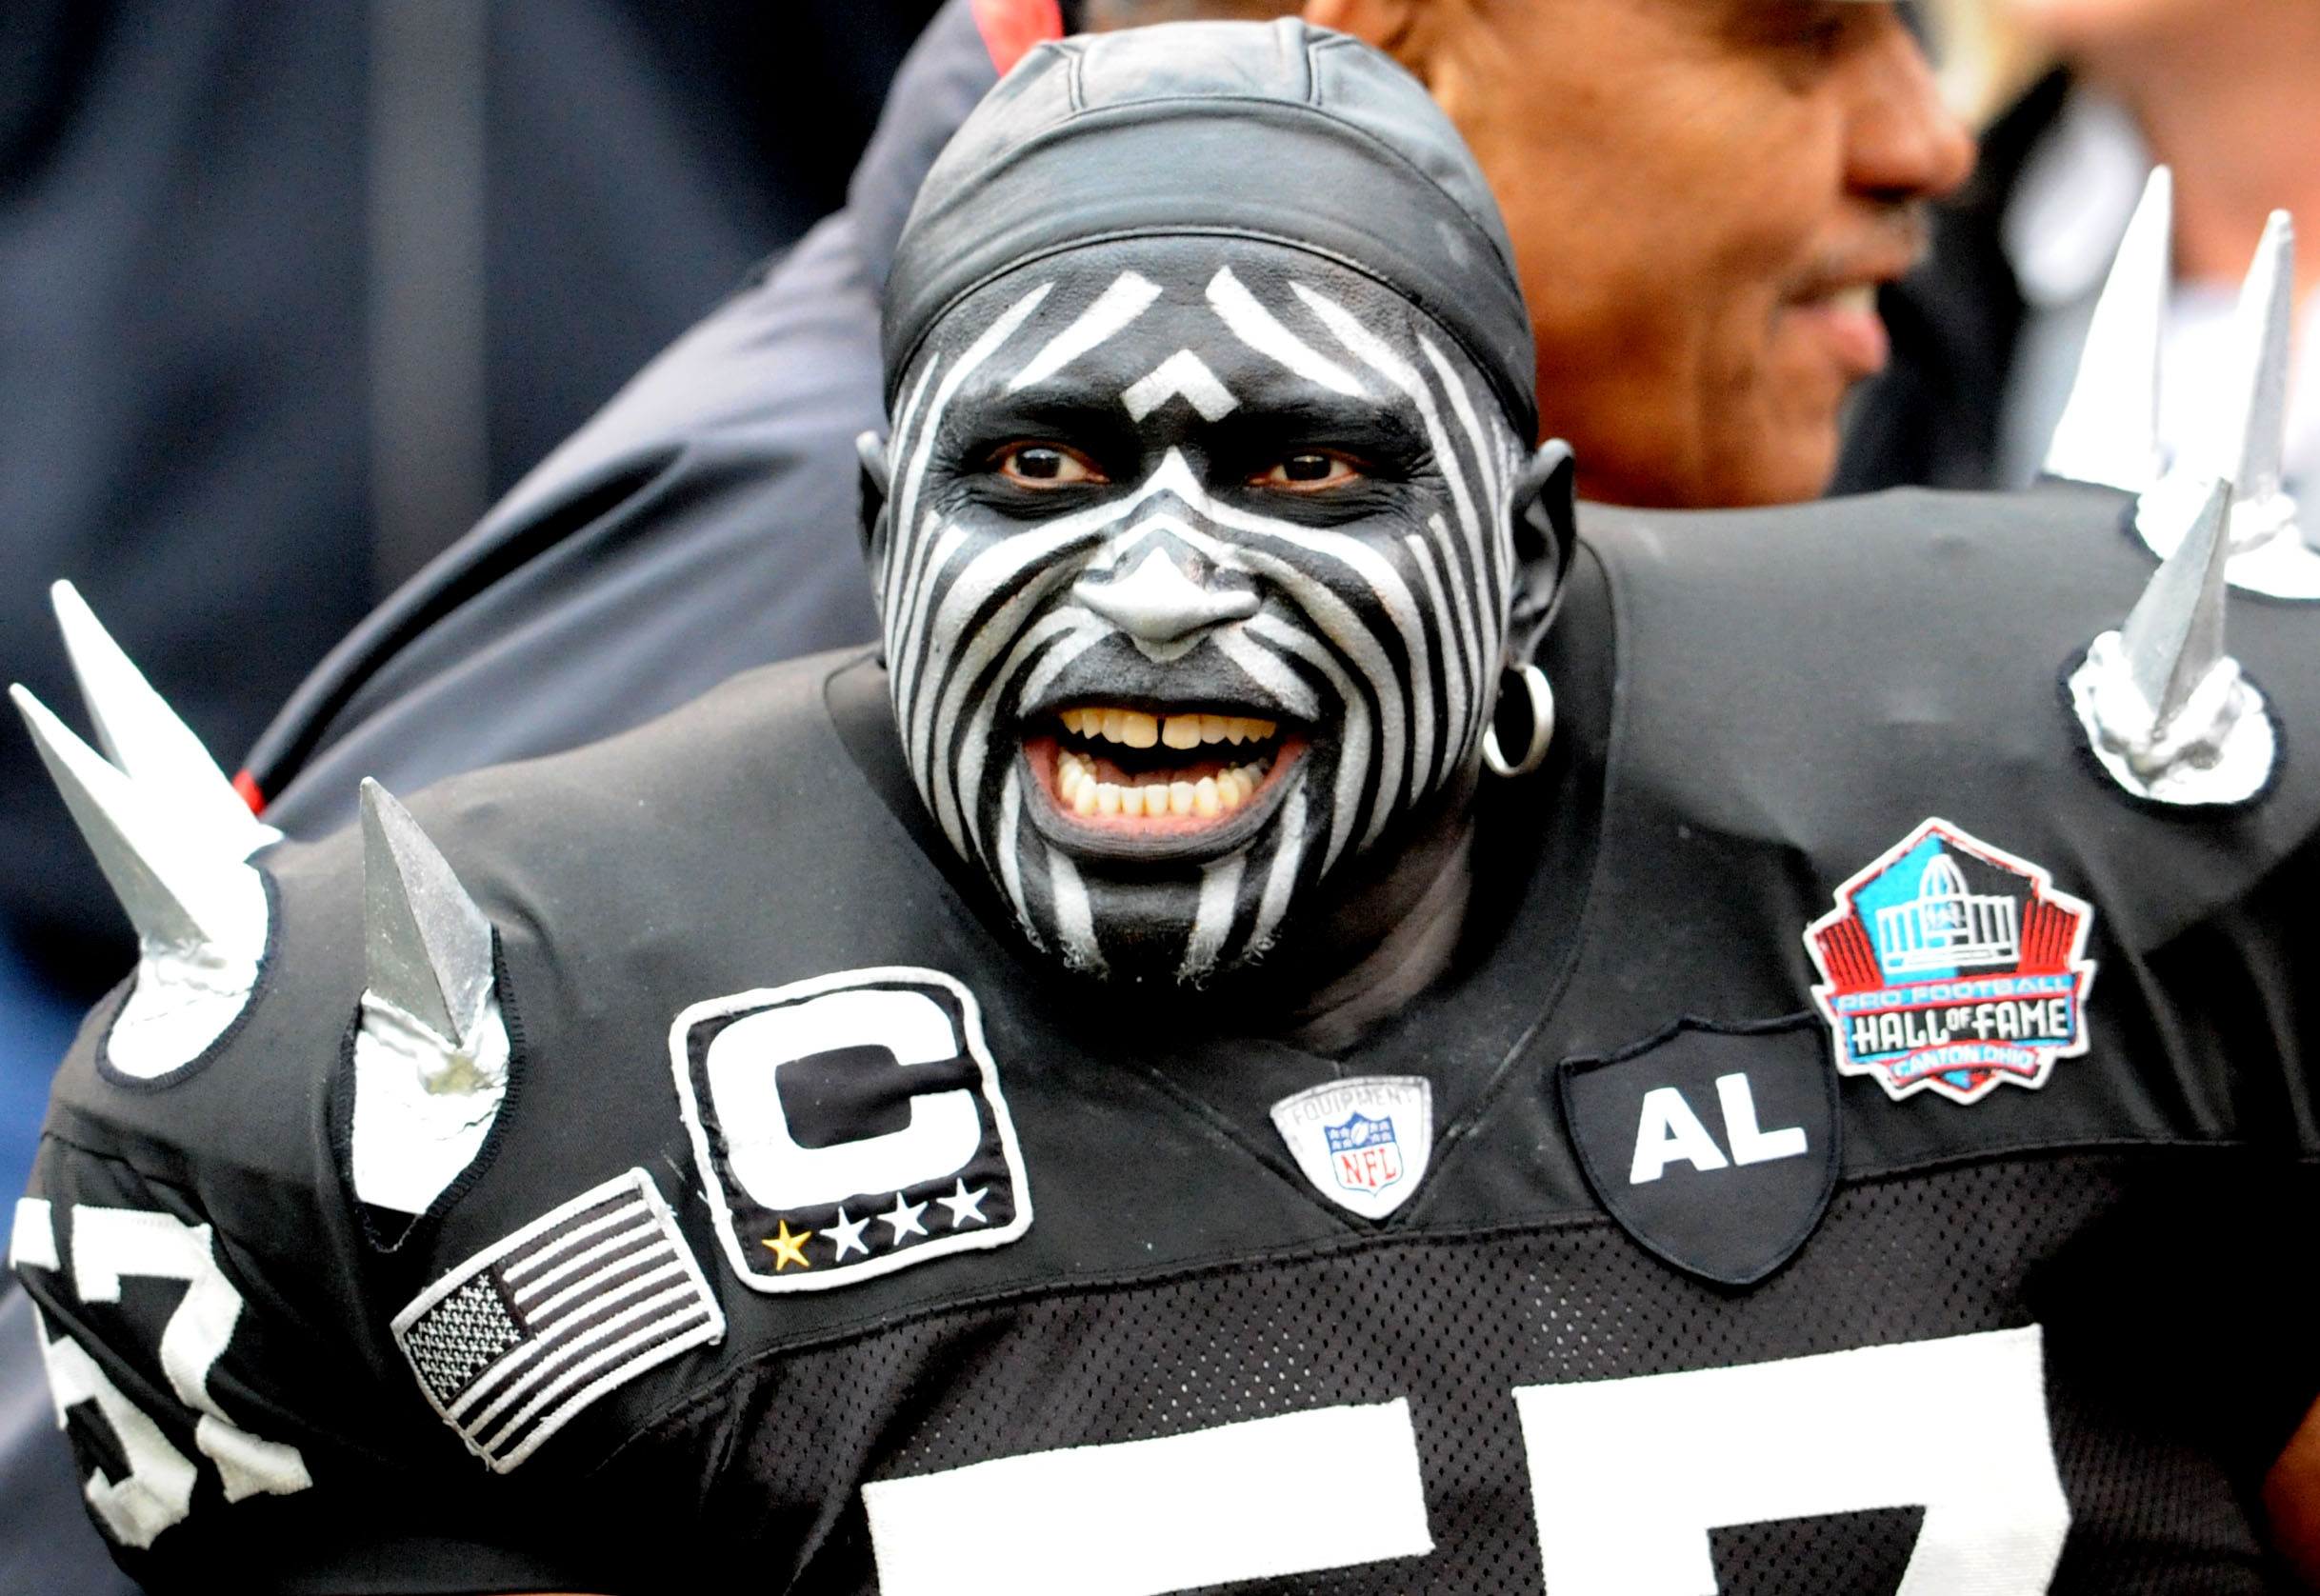 Raiders fan Wayne Mabry, also known as the "Violator," cheers for his team.